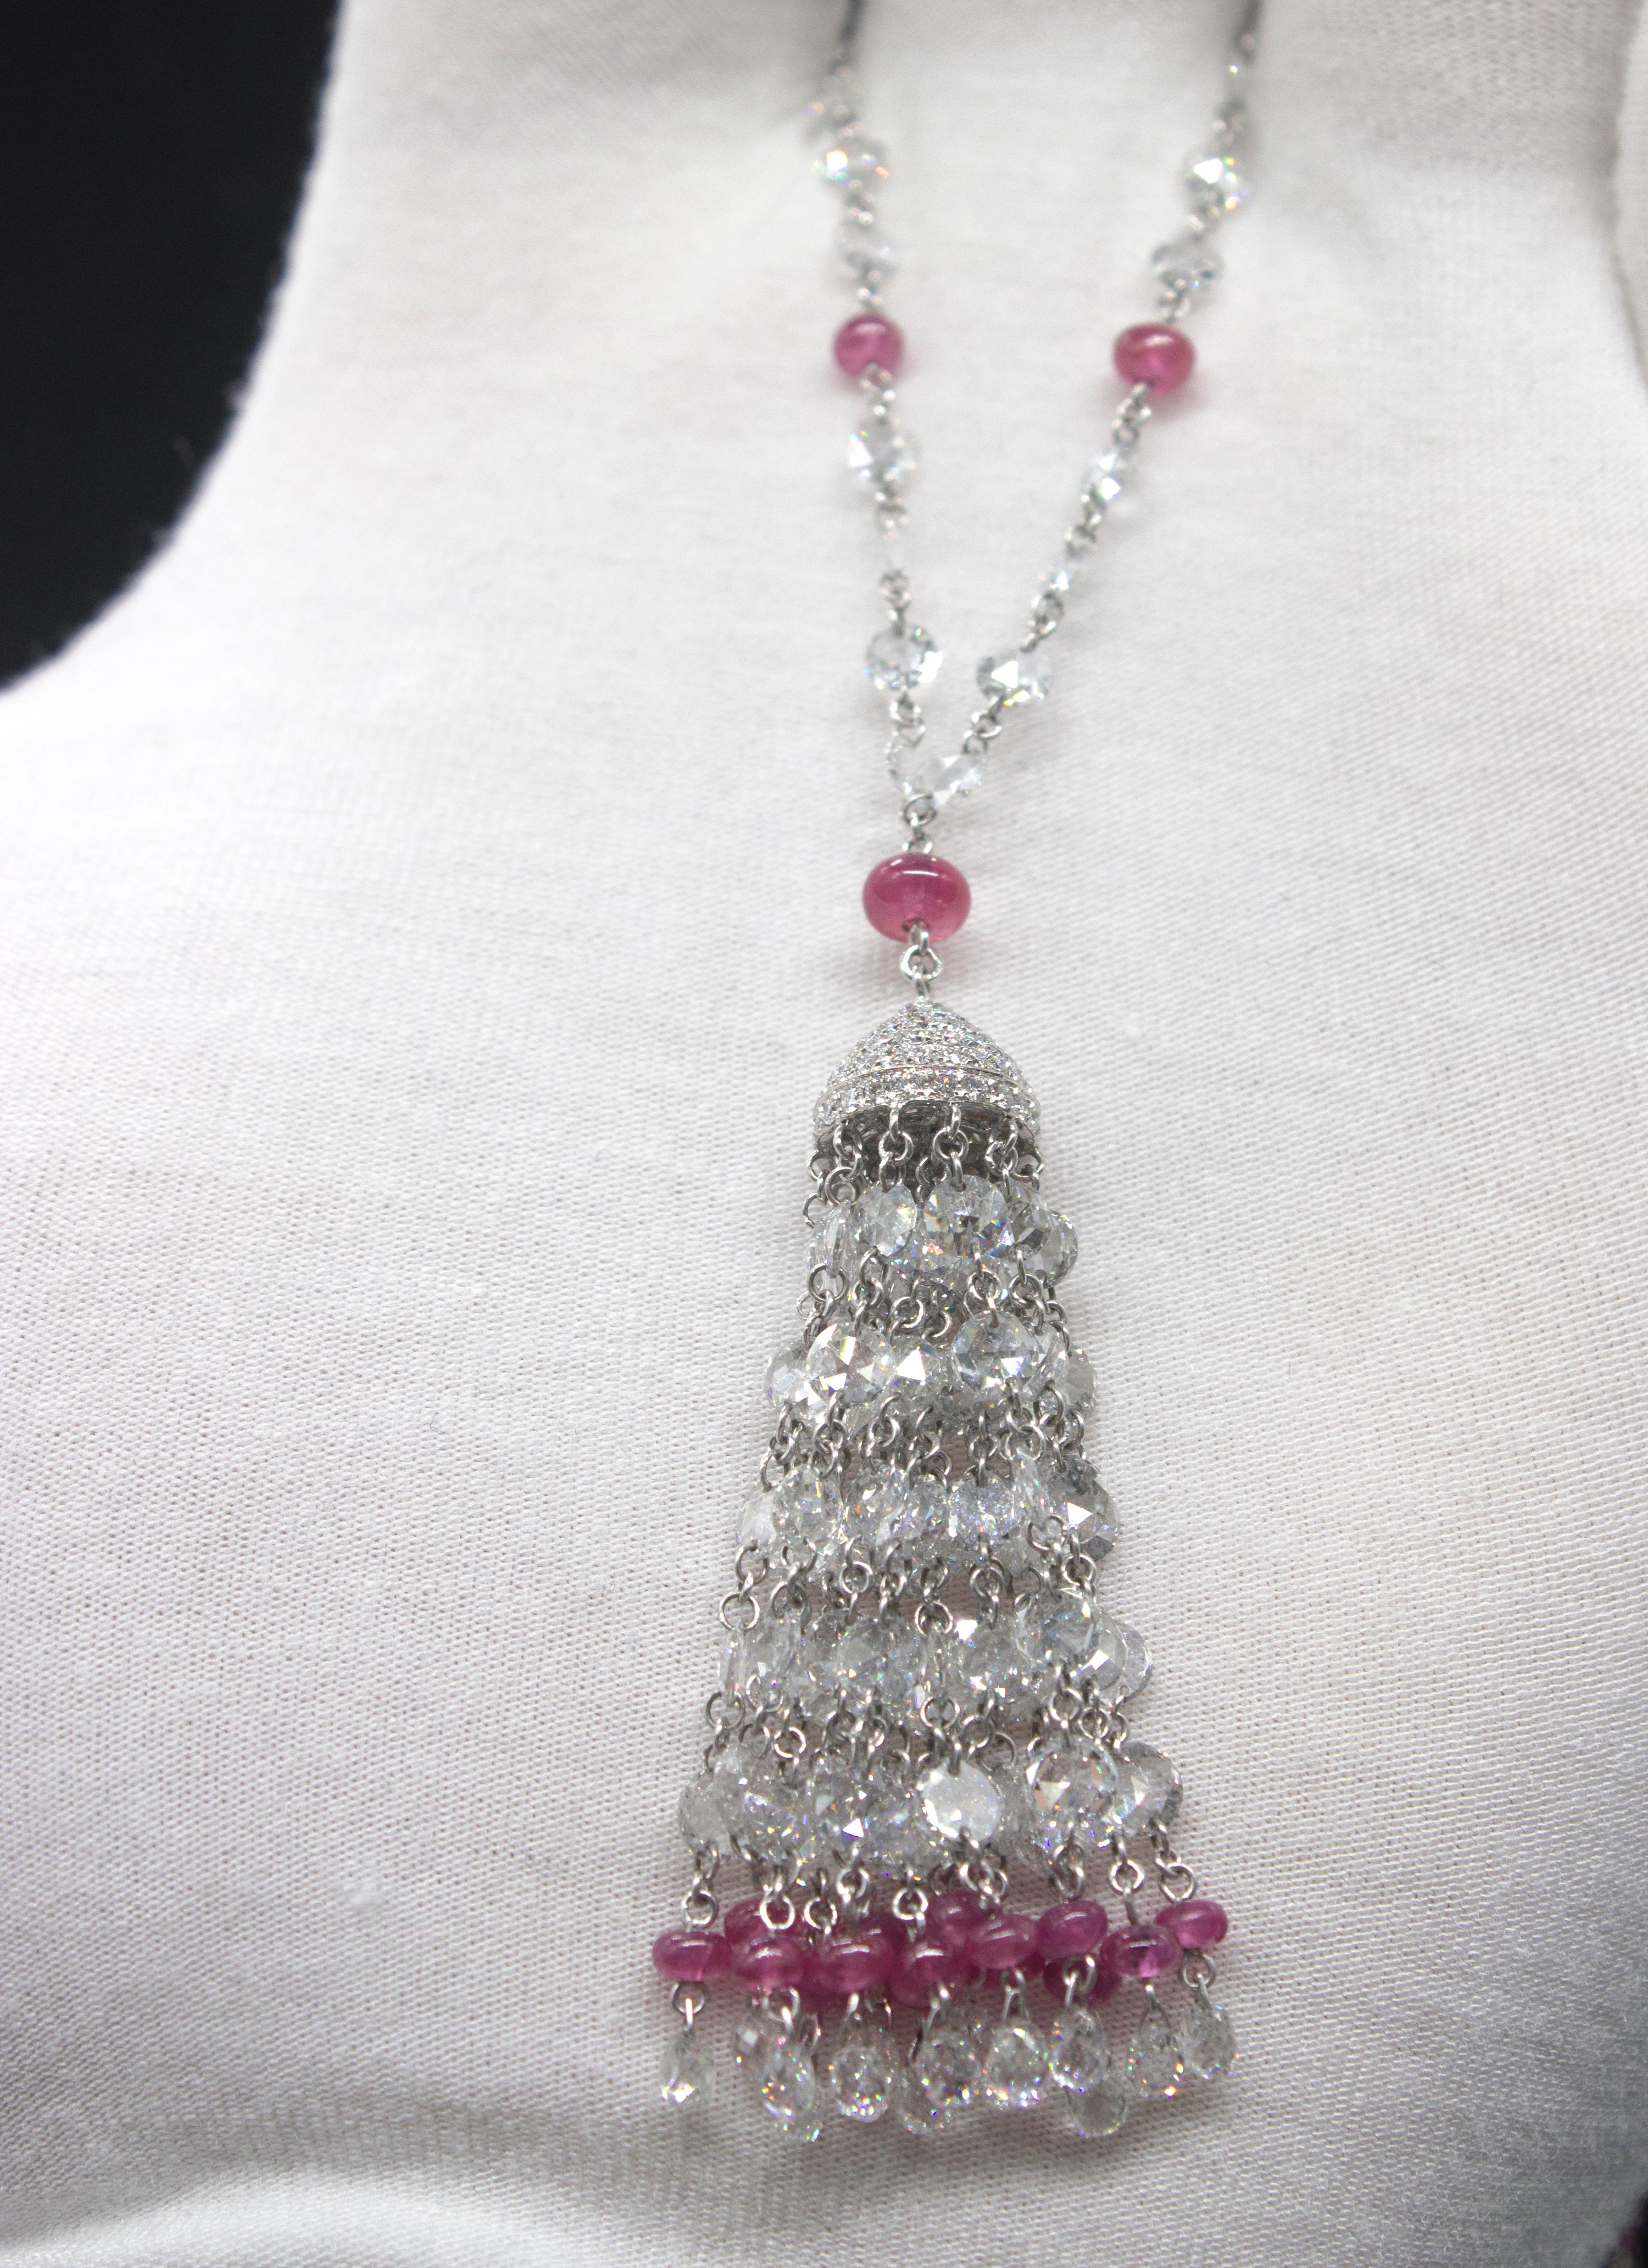 PANIM 19.23 Carat Diamond Rosecut & Ruby 18K White Gold Tassel Necklace

Mesmerizing approximately 20cts finely crafted Diamond Rosecuts with a melange of Natural Rubies weighting upto 9 cts. Subtly accentuated by a pavé diamond lobster clasp and